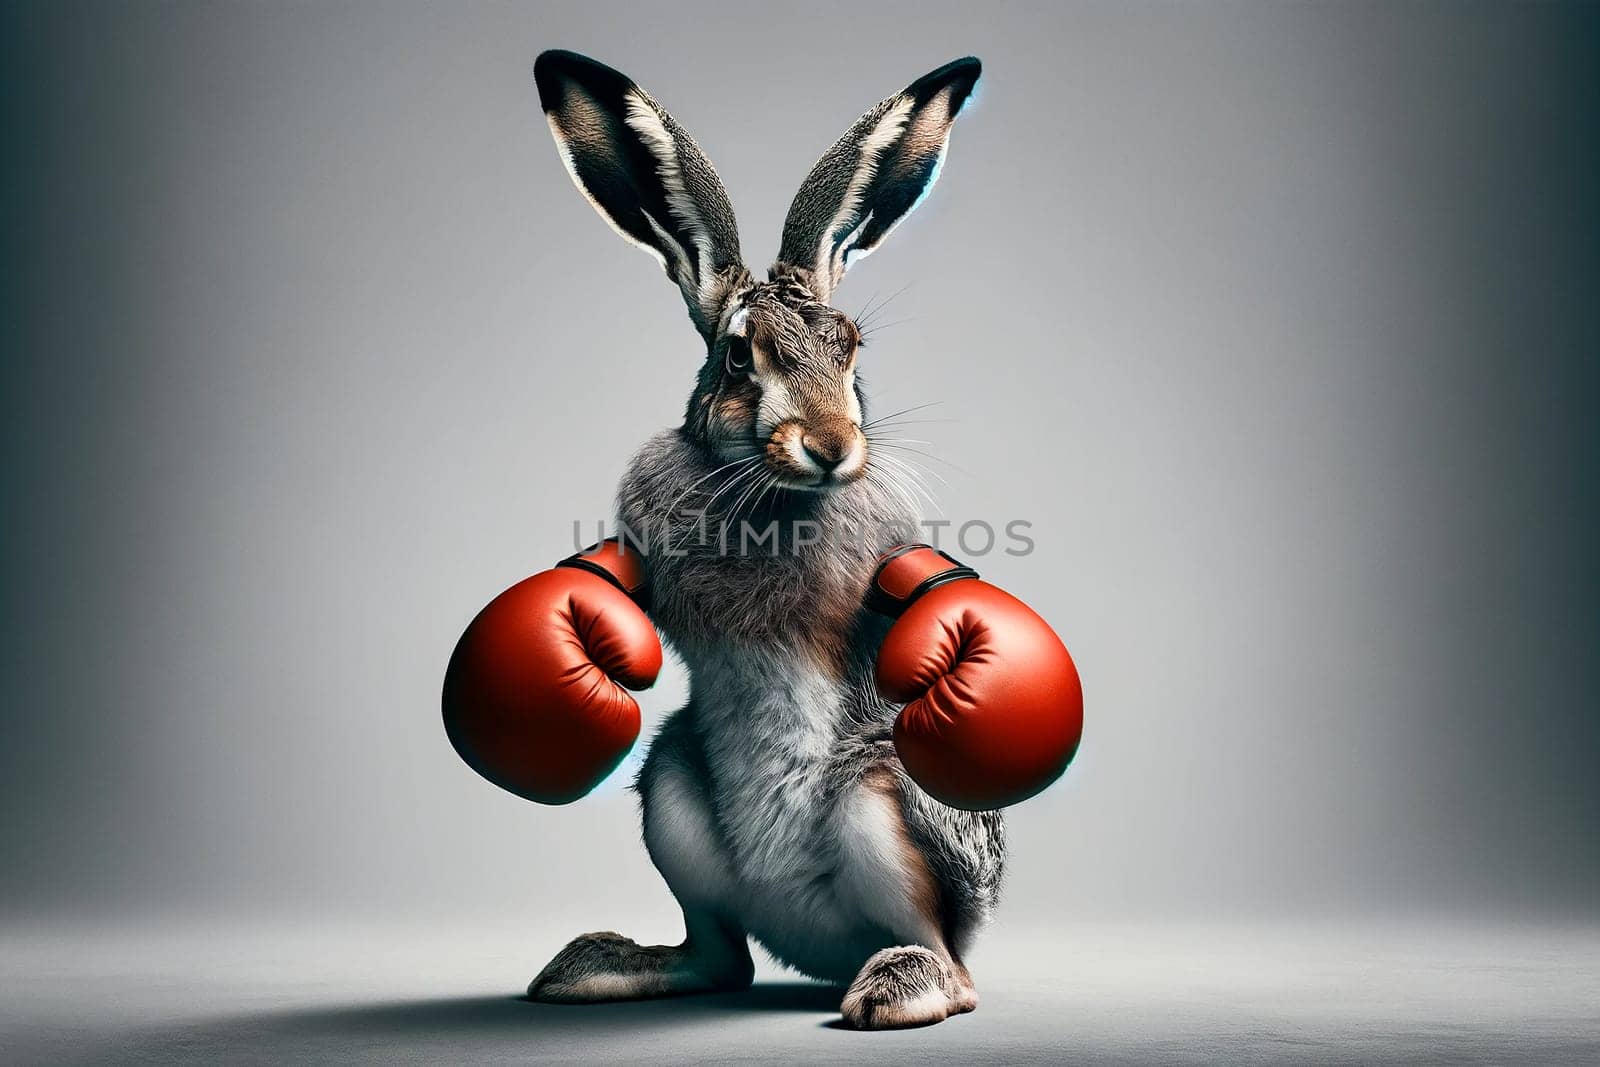 A hare in boxing gloves stands on his hind legs on a gray background by Annado